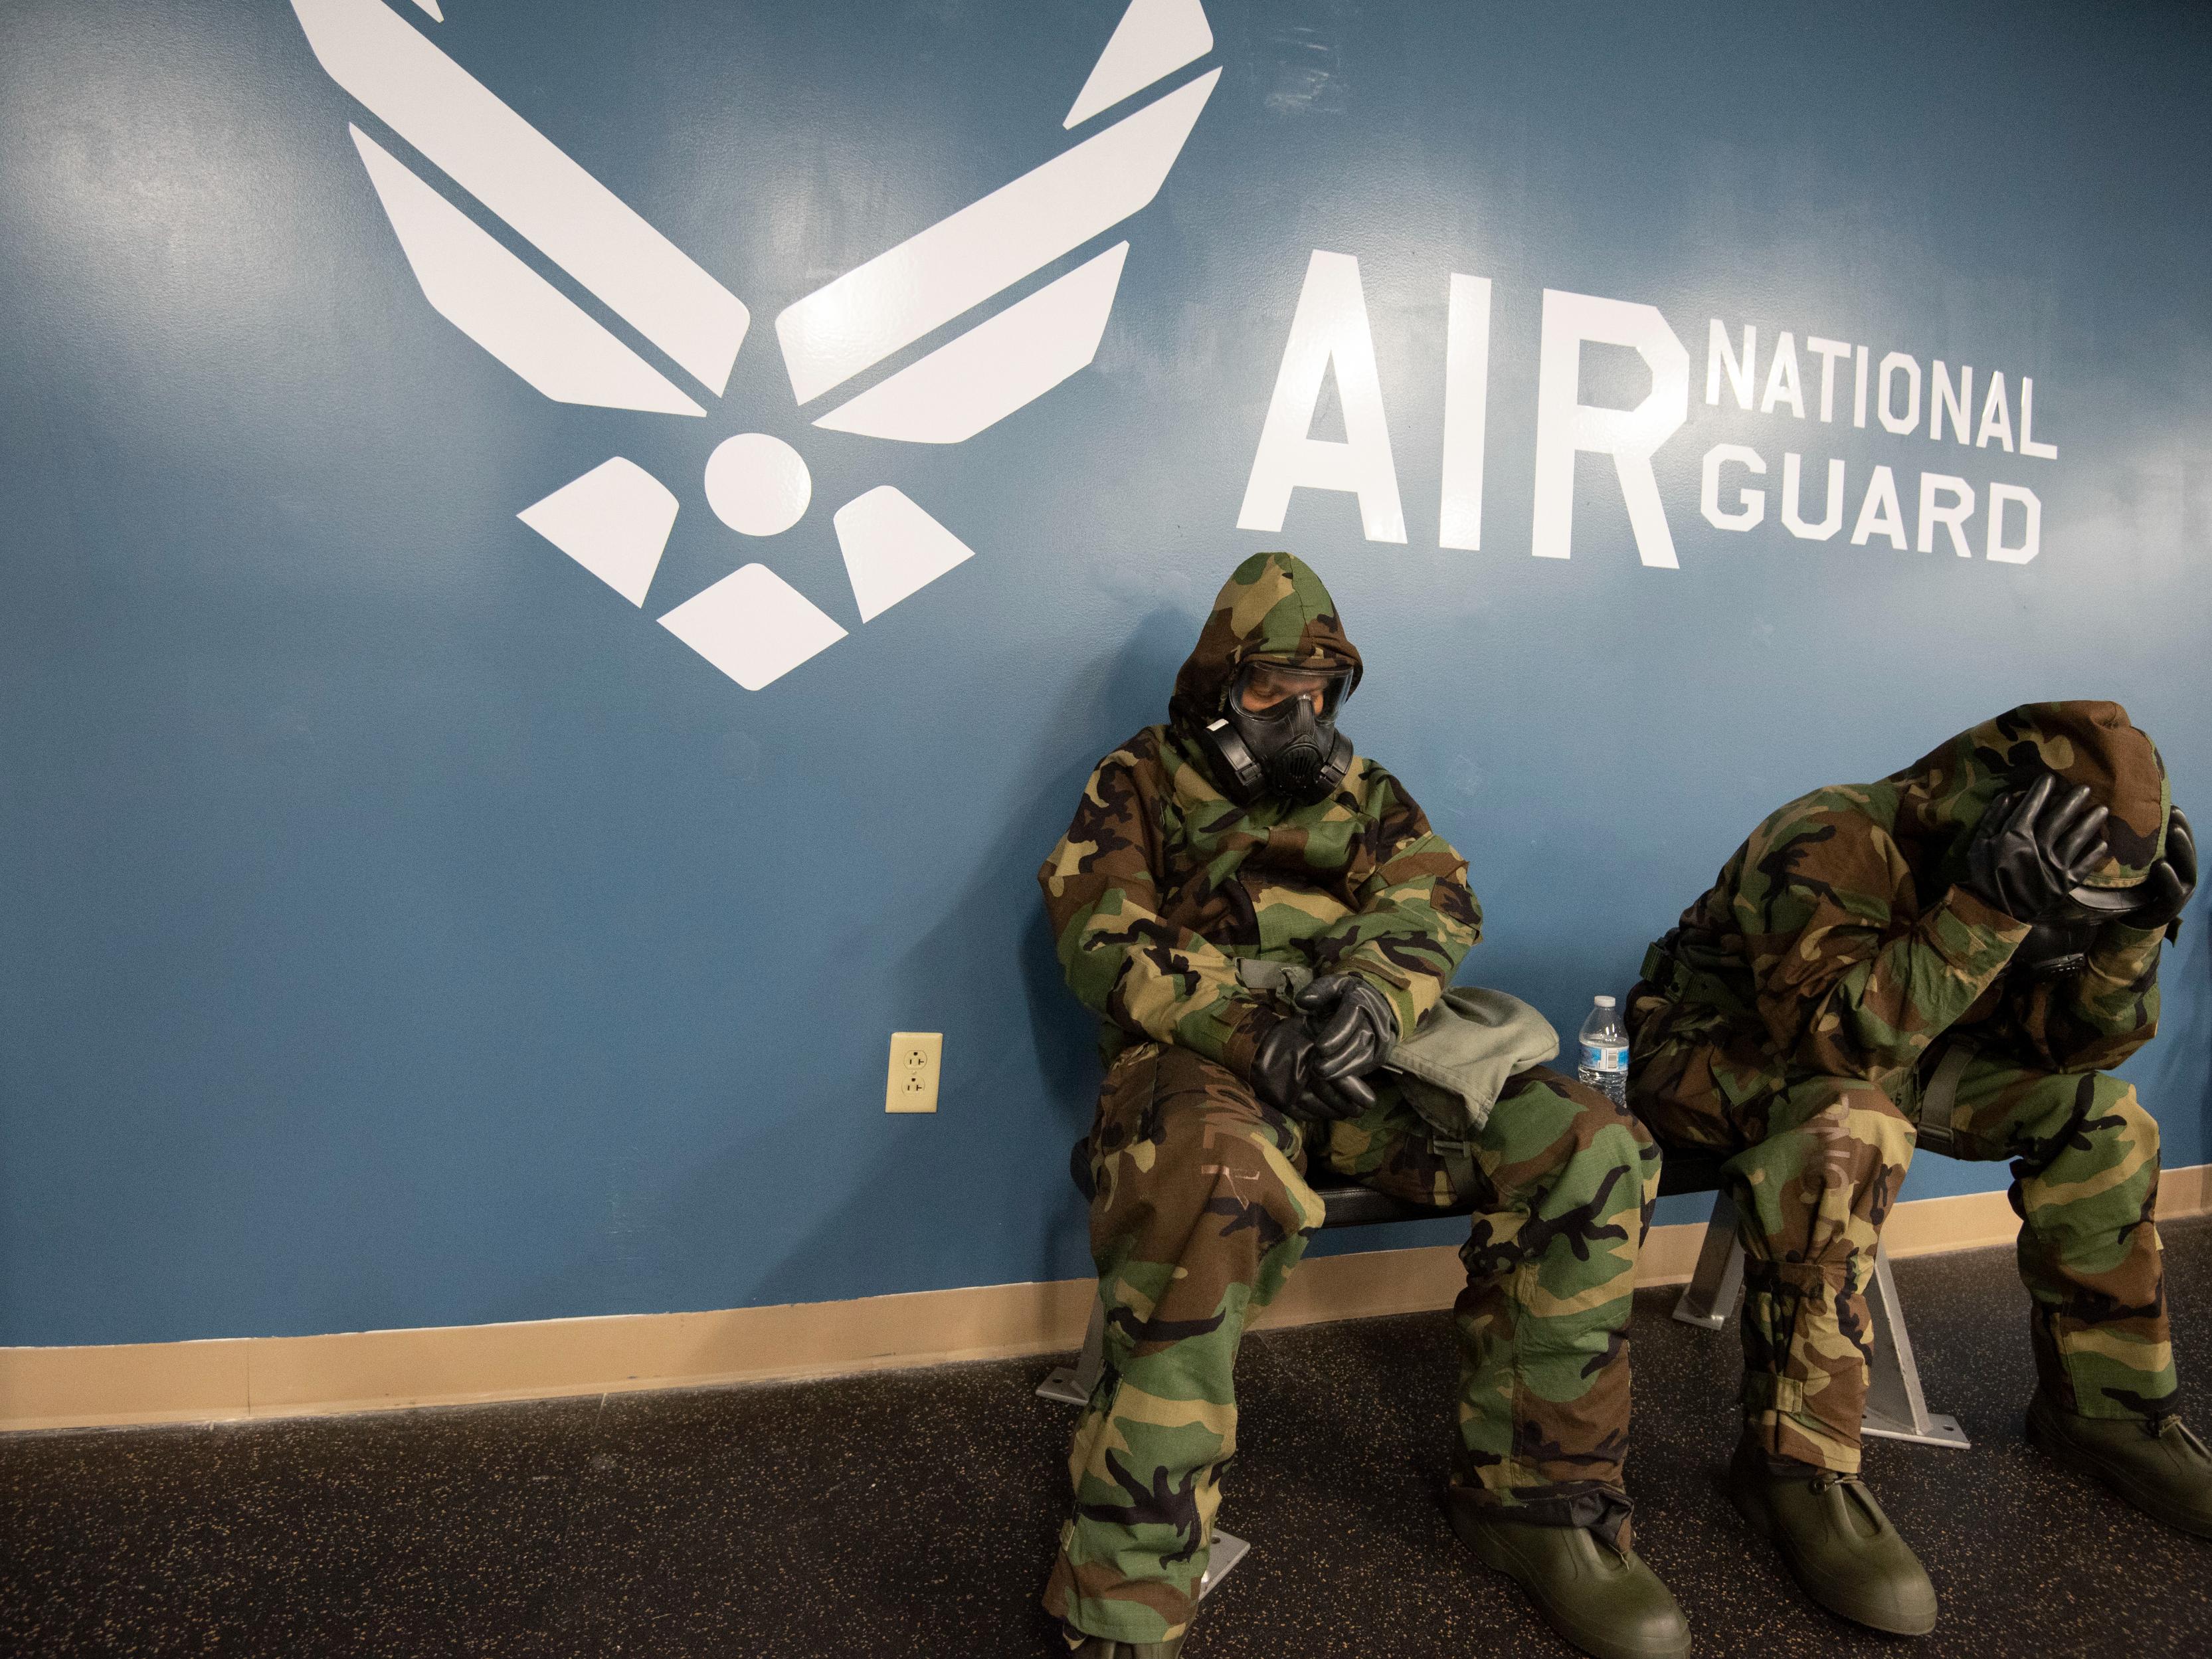 U.S. Air Force Staff Sgt. Wendy Kuhn, left, with the 121st Air Refueling Wing Public Affairs Office, awaits the "All Clear" while wearing an M50 gas mask during a Nuclear Operational Readiness Exercise, September 20, 2021, at Rickenbacker Air National Guard Base, Ohio. The NORE is to prepare Airmen for an upcoming Nuclear Operational Readiness Inspection (NORI). (U.S. Air National Guard photo by Tech Sgt. James Courtright)